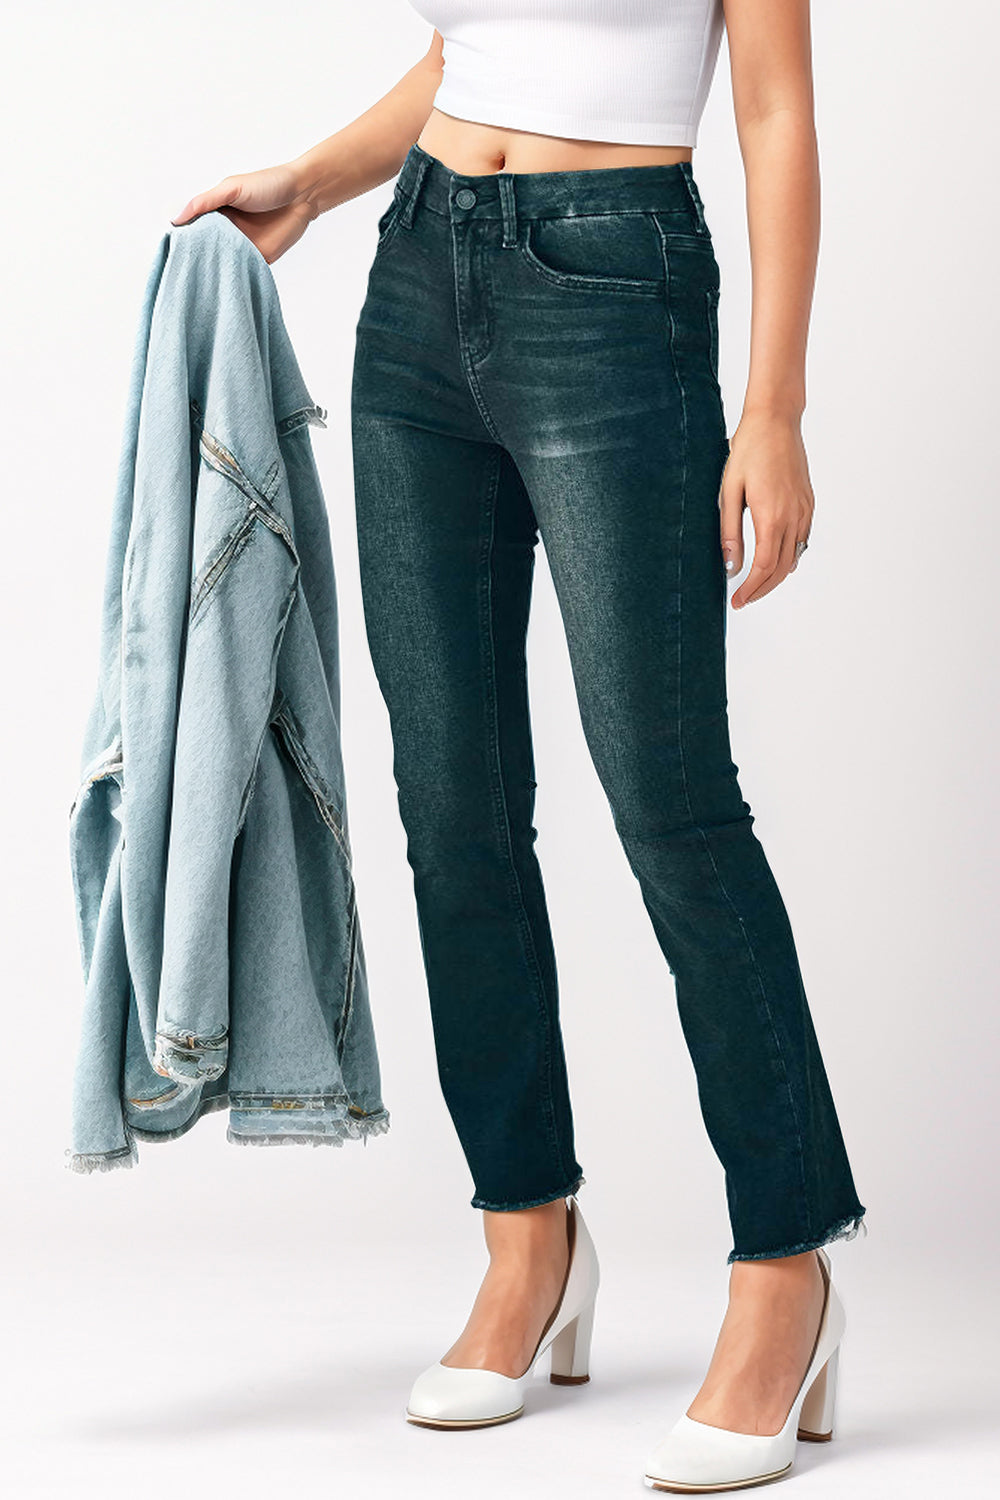 Mid-Rise Waist Skinny Jeans with Pockets apparel & accessories